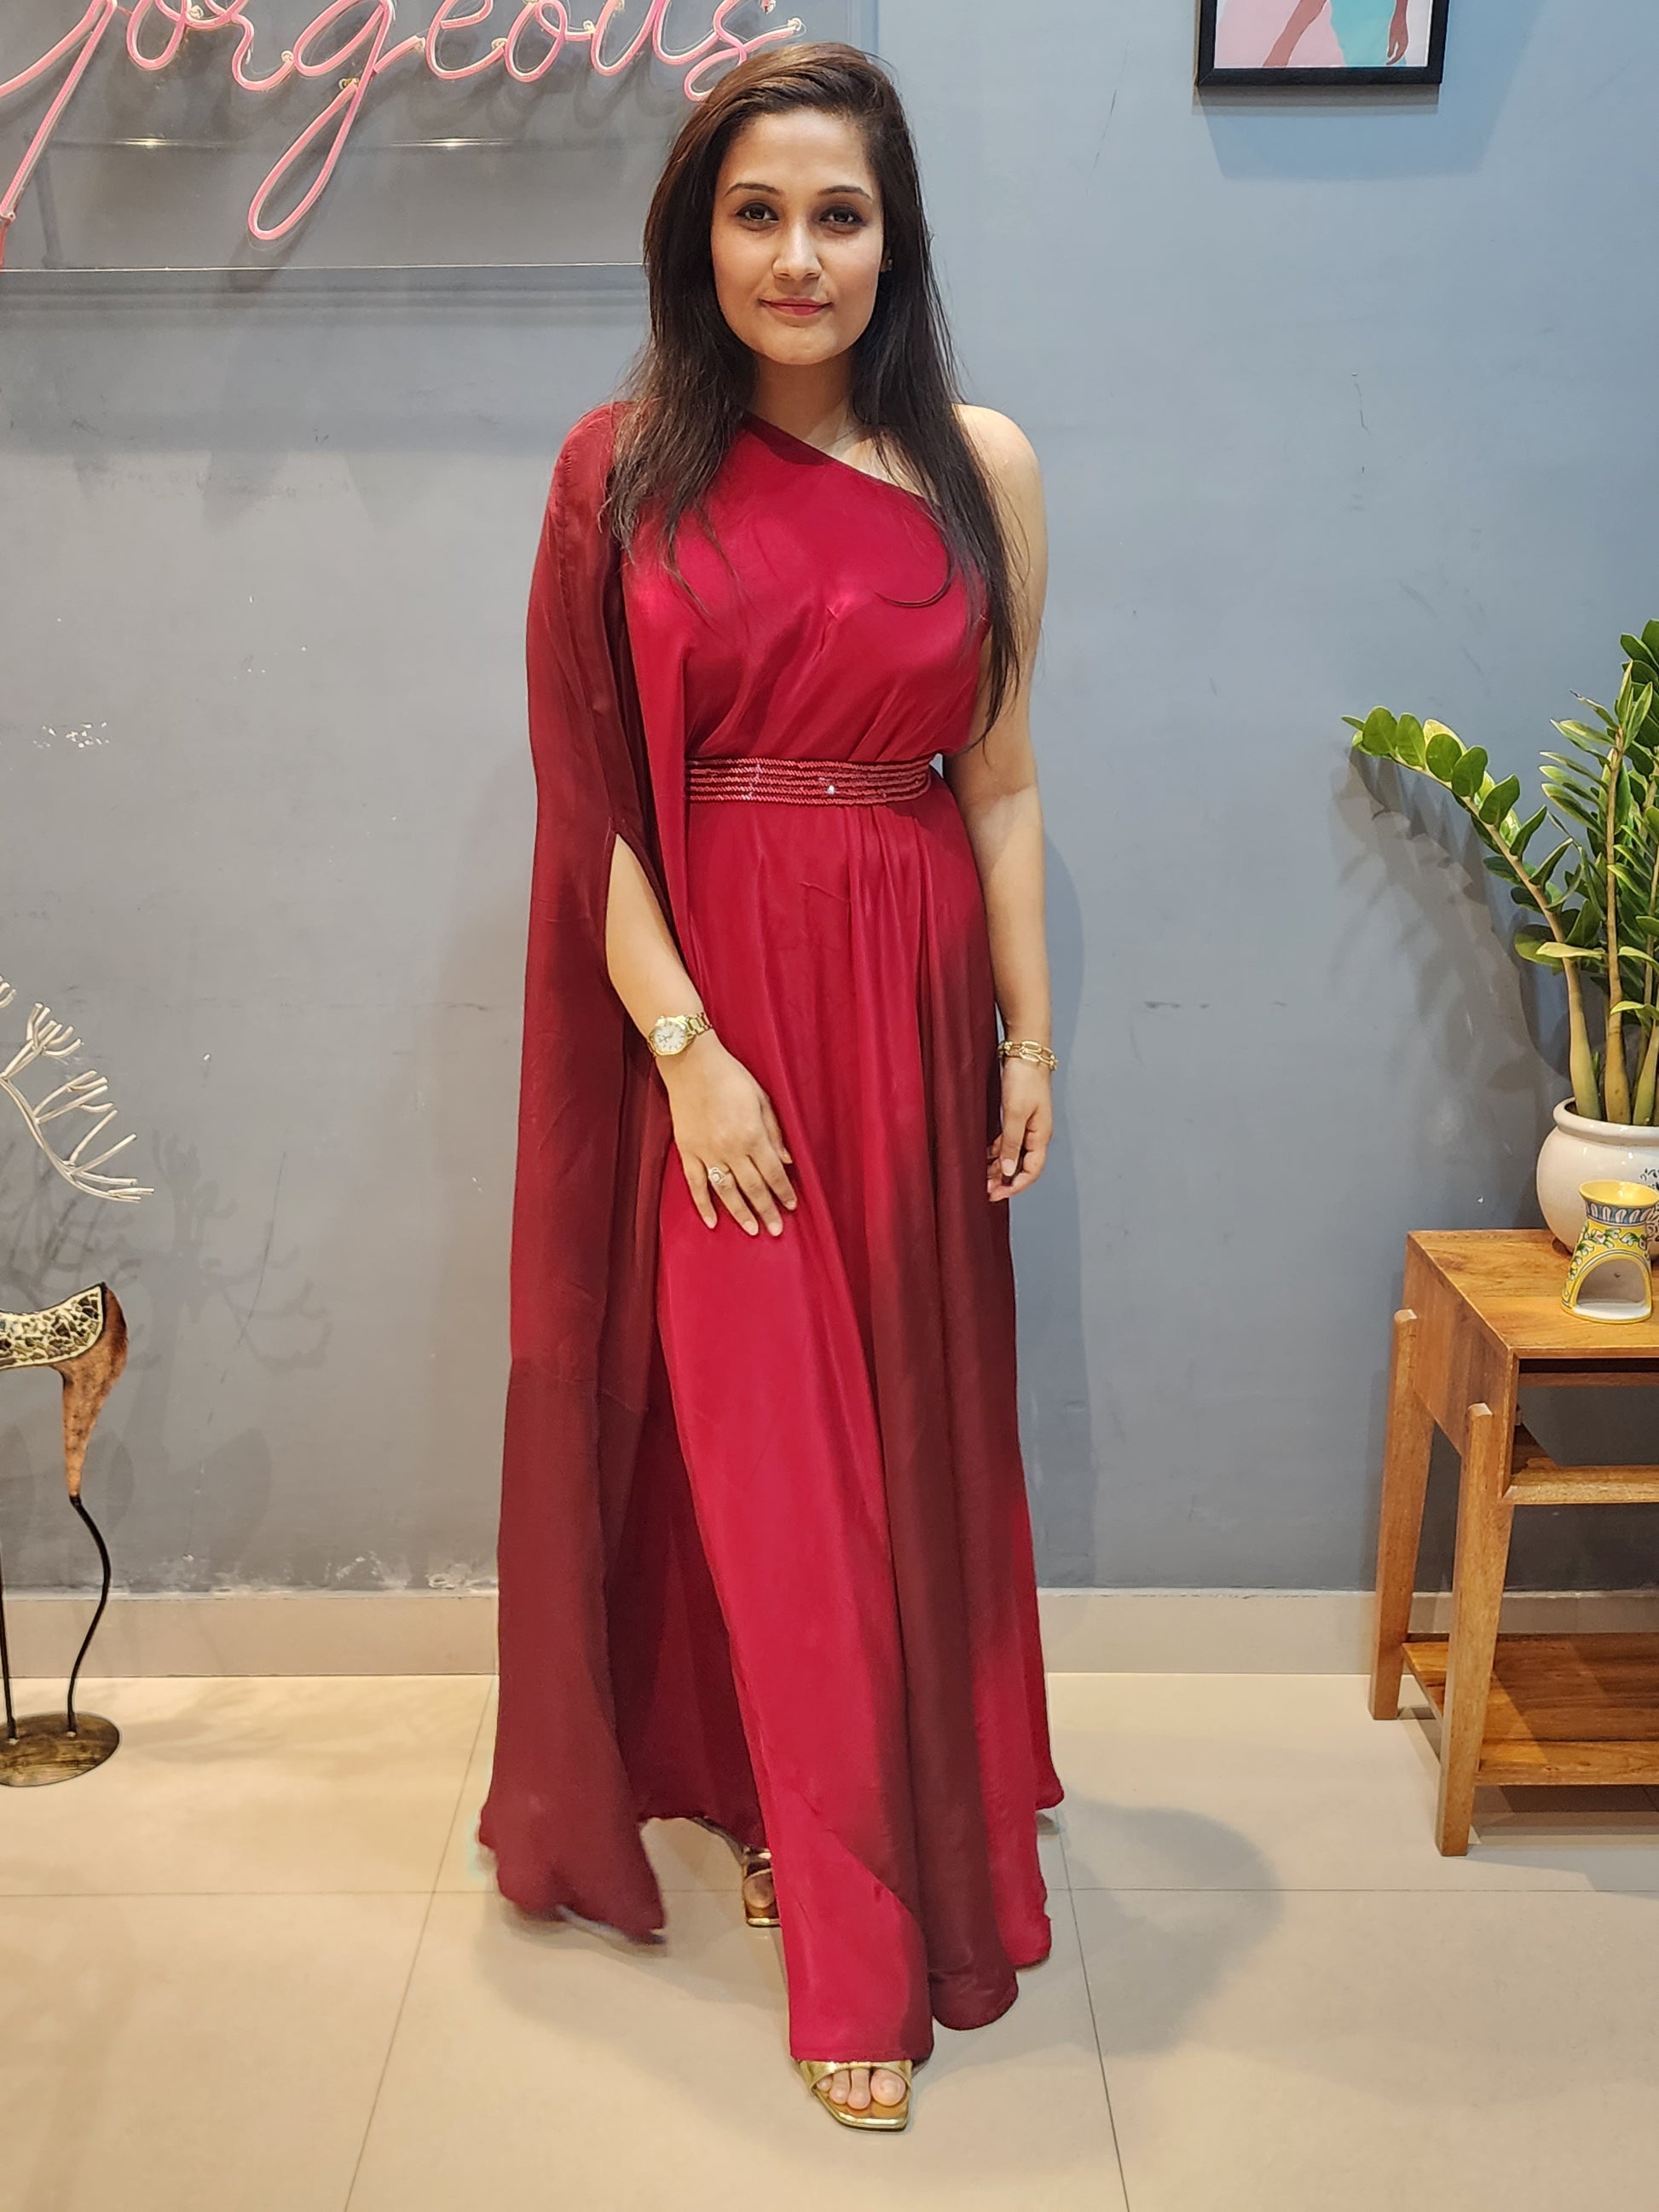 Elevate your style with stunning cocktail dresses by Ashika Ranganath​ |  TOIPhotogallery